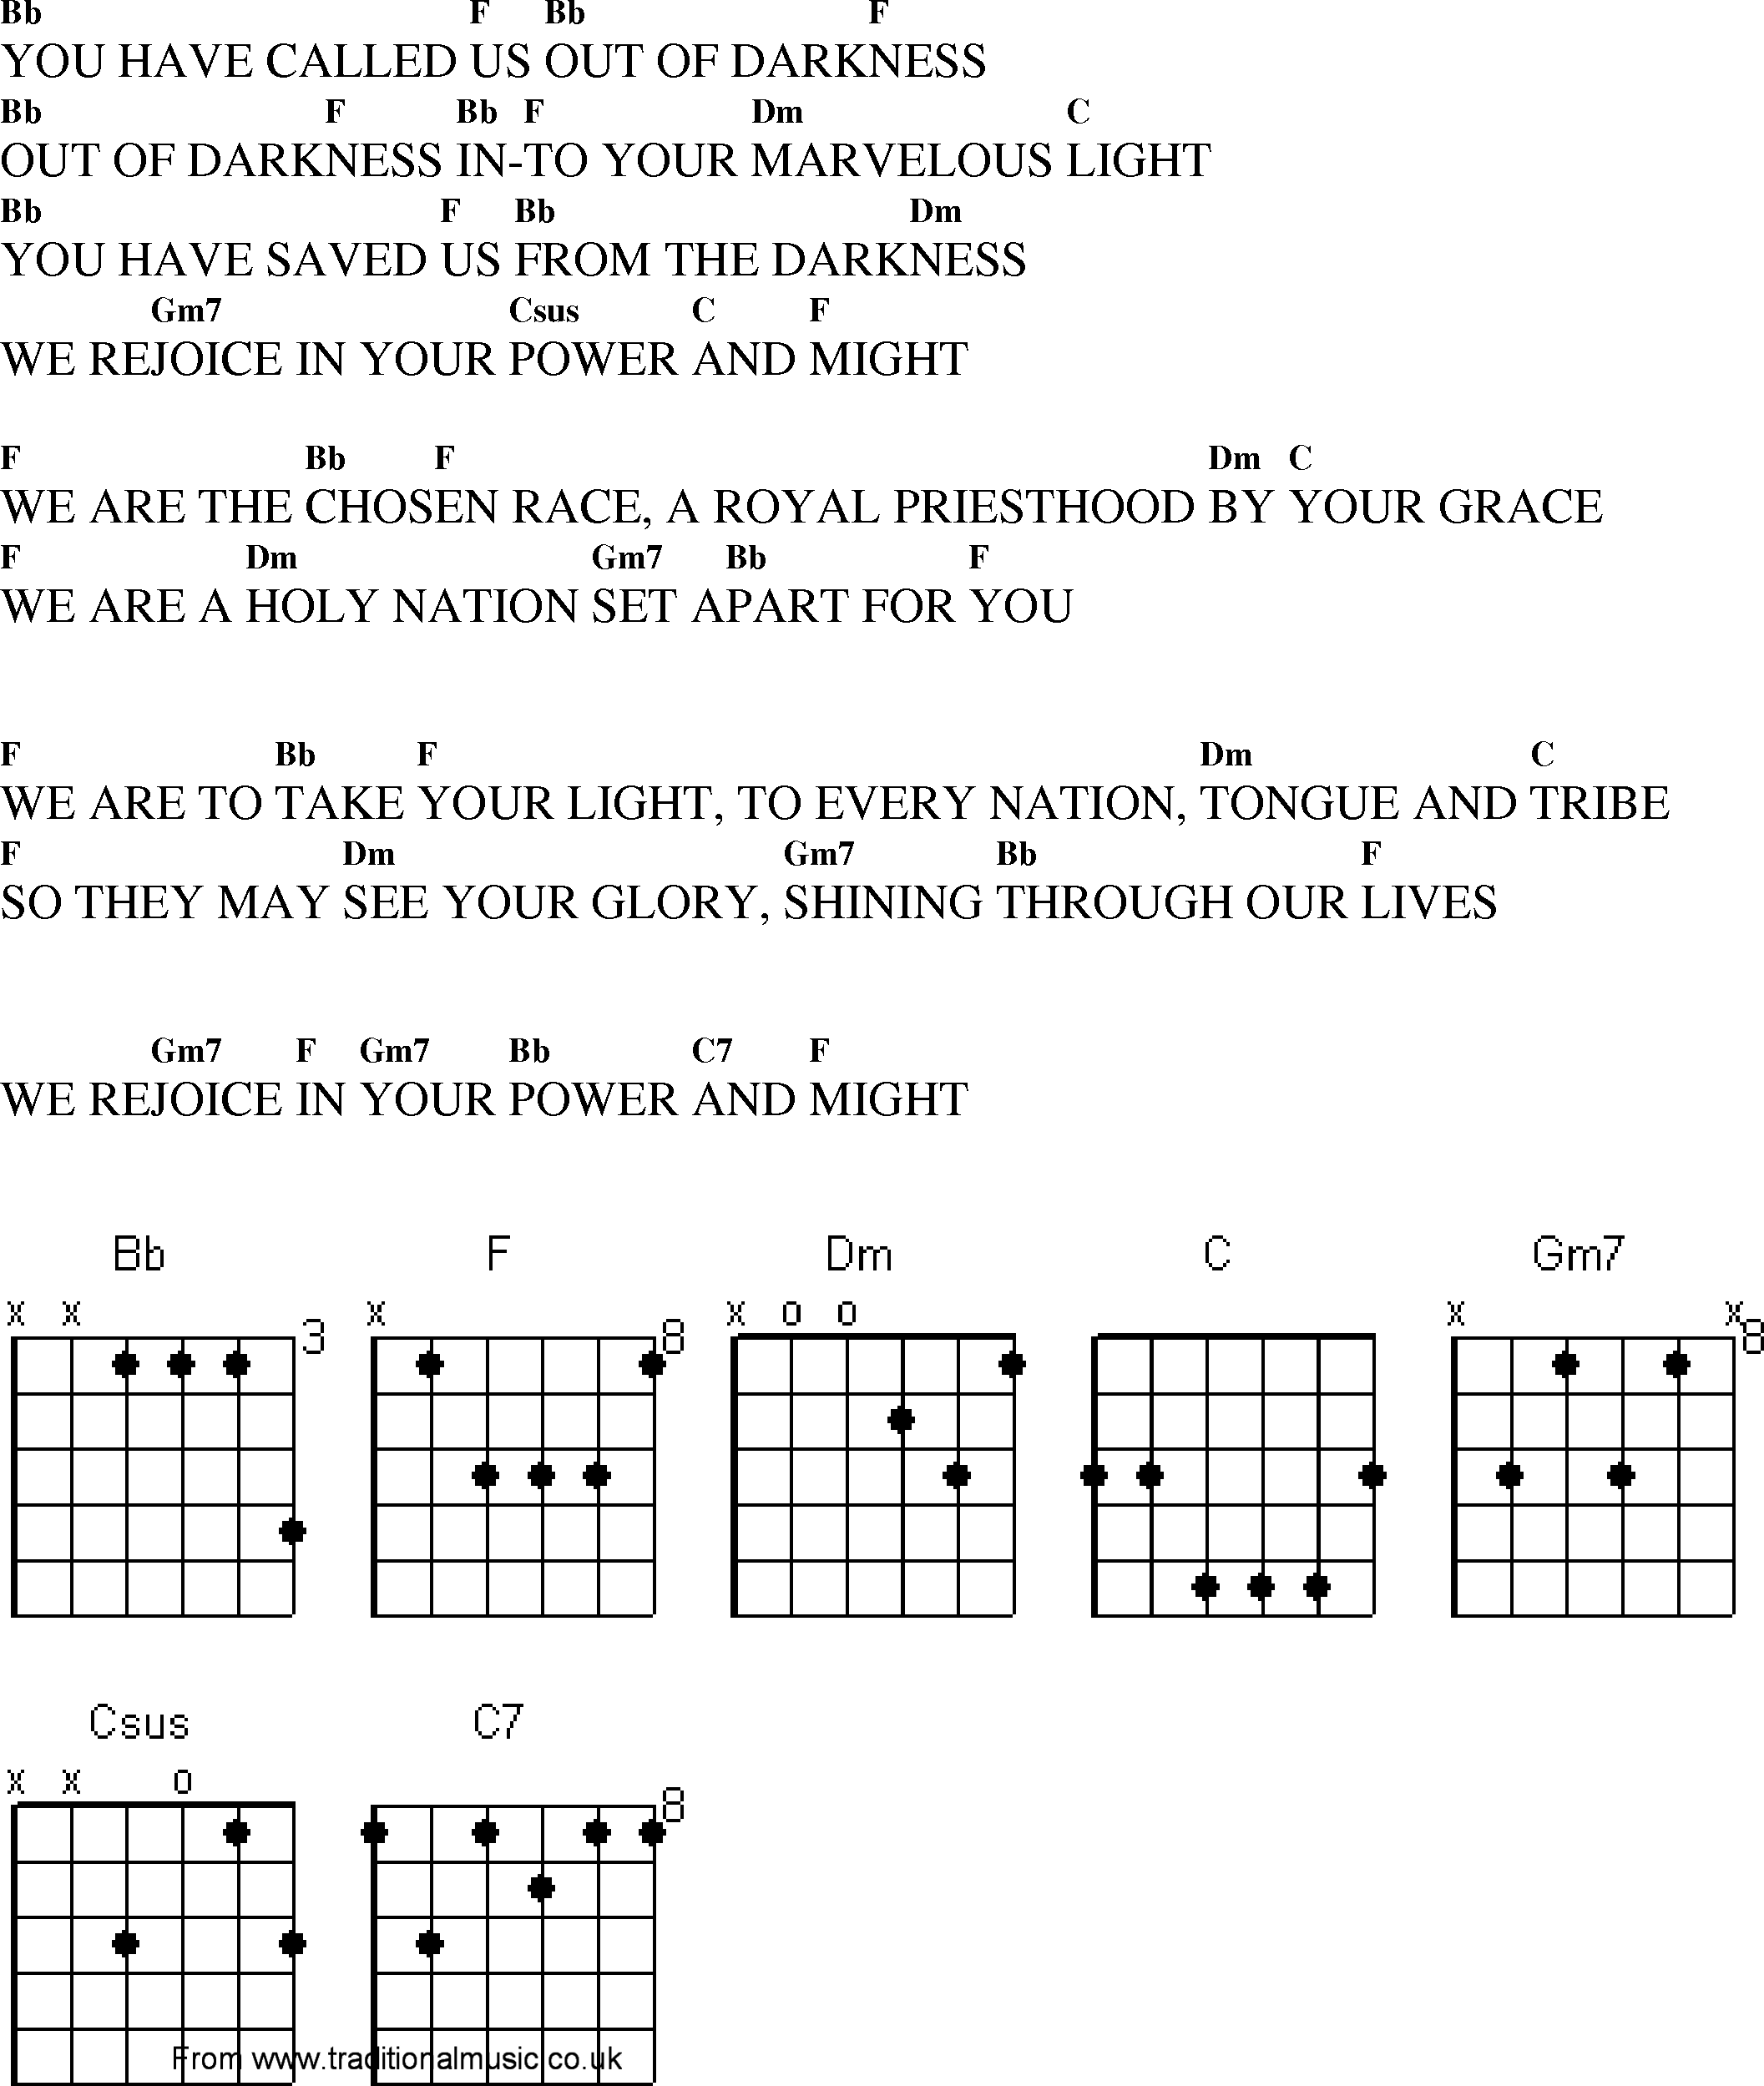 Gospel Song: you_have_called_us_out_of_darkness, lyrics and chords.